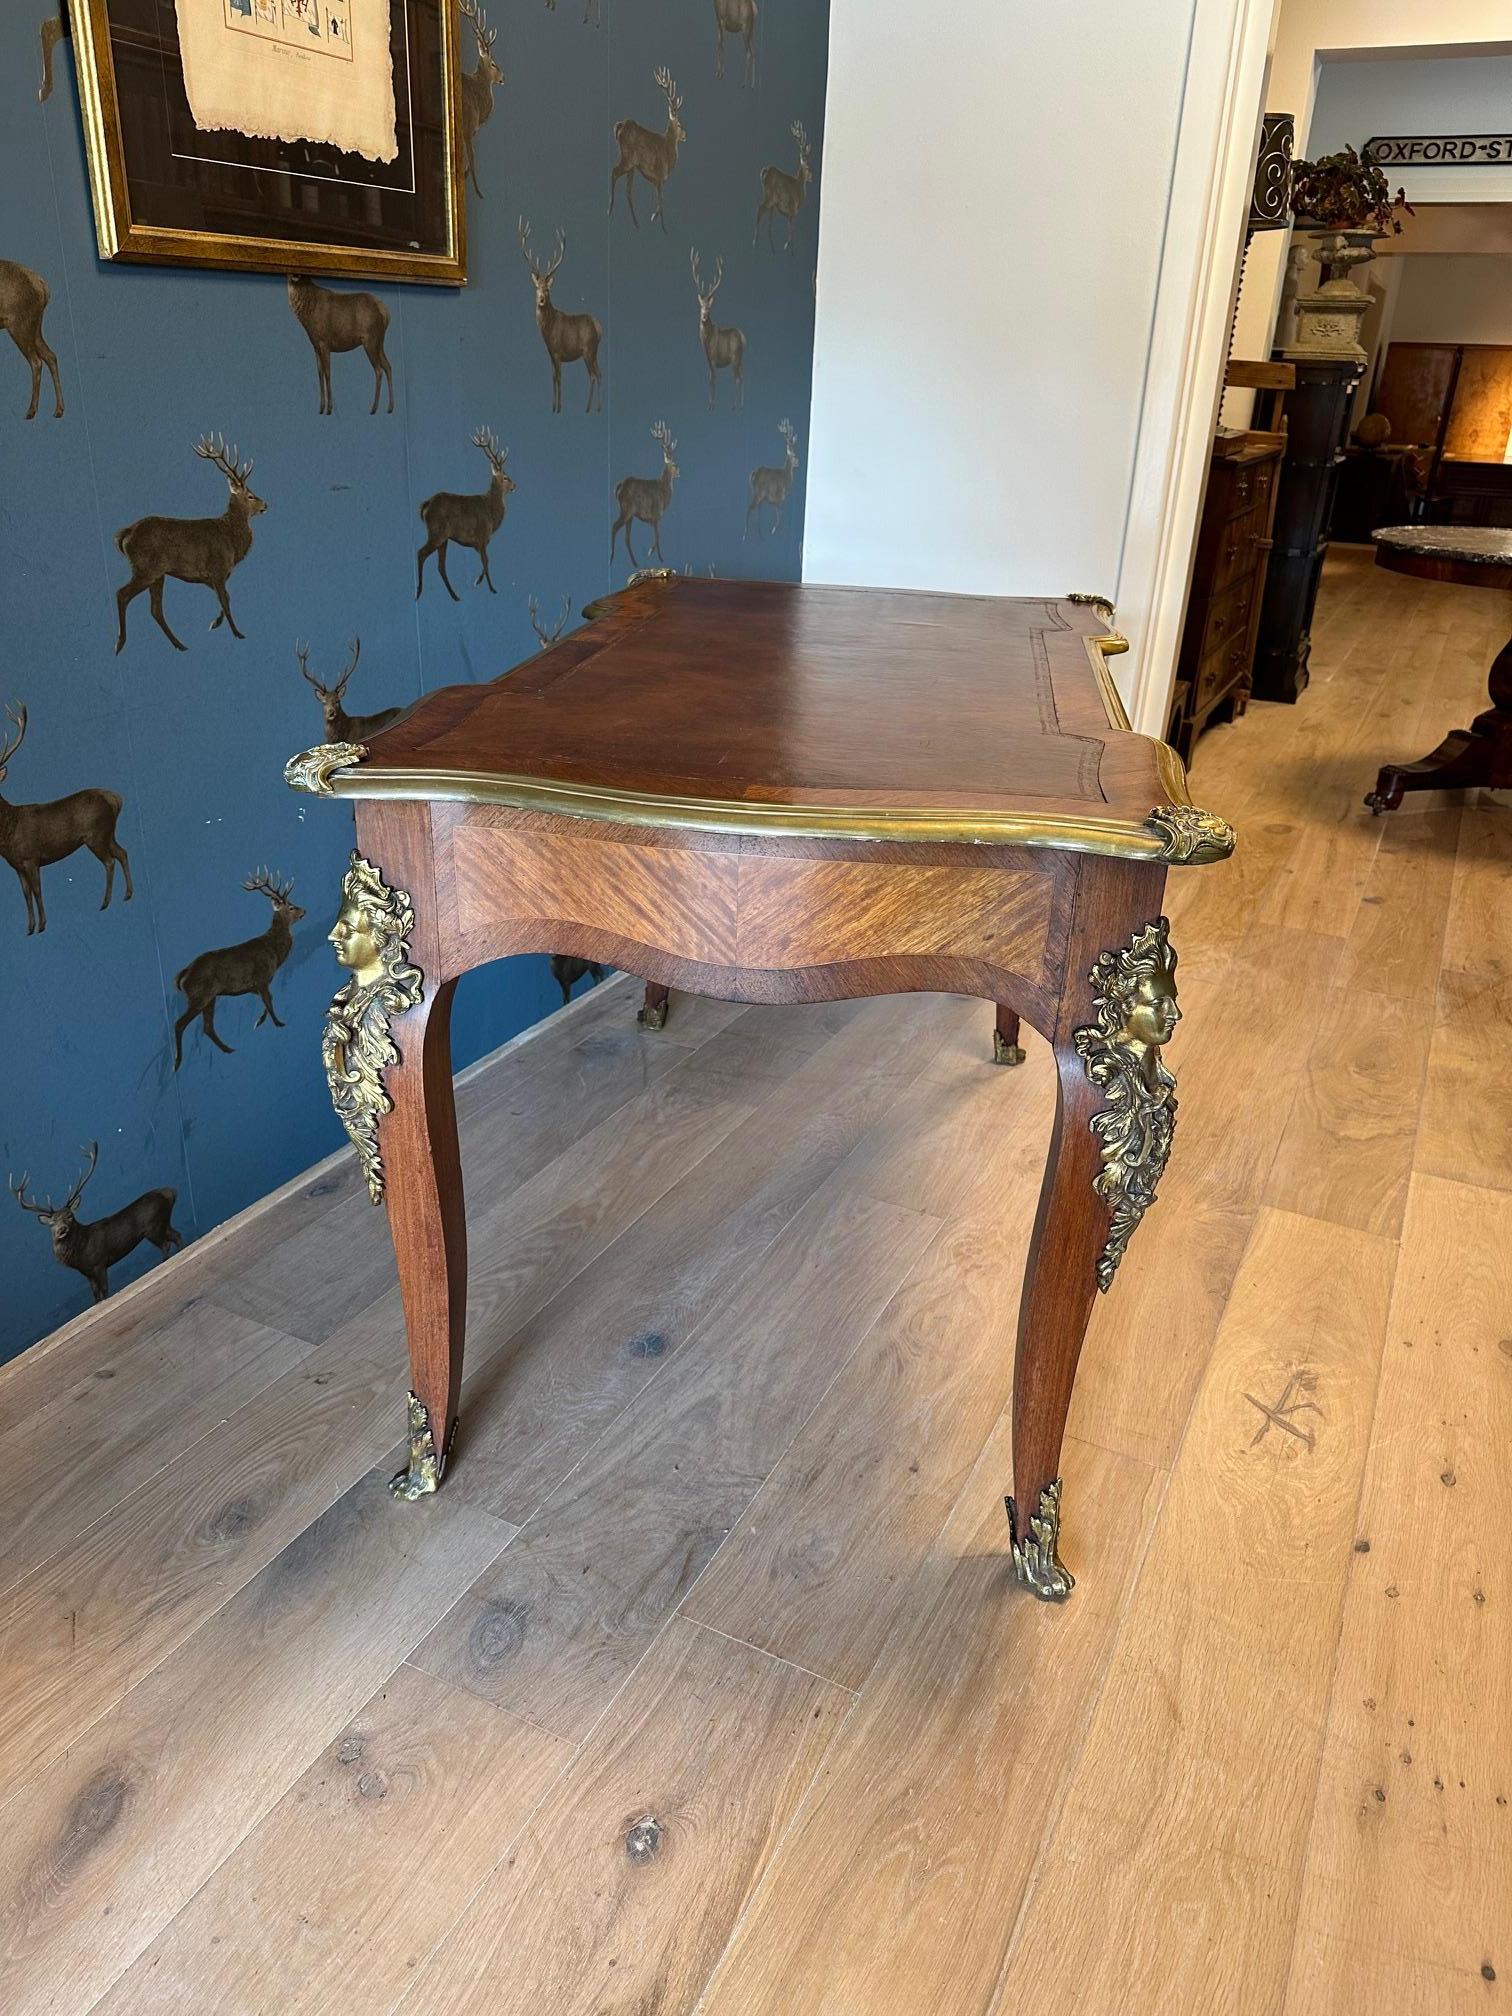 Beautiful antique walnut writing table with brown leather top. The table has 3 drawers on one side and the other sides are not drawers but look like they are. The table is richly decorated with ormolu-bronze ornaments. The whole has a beautiful,